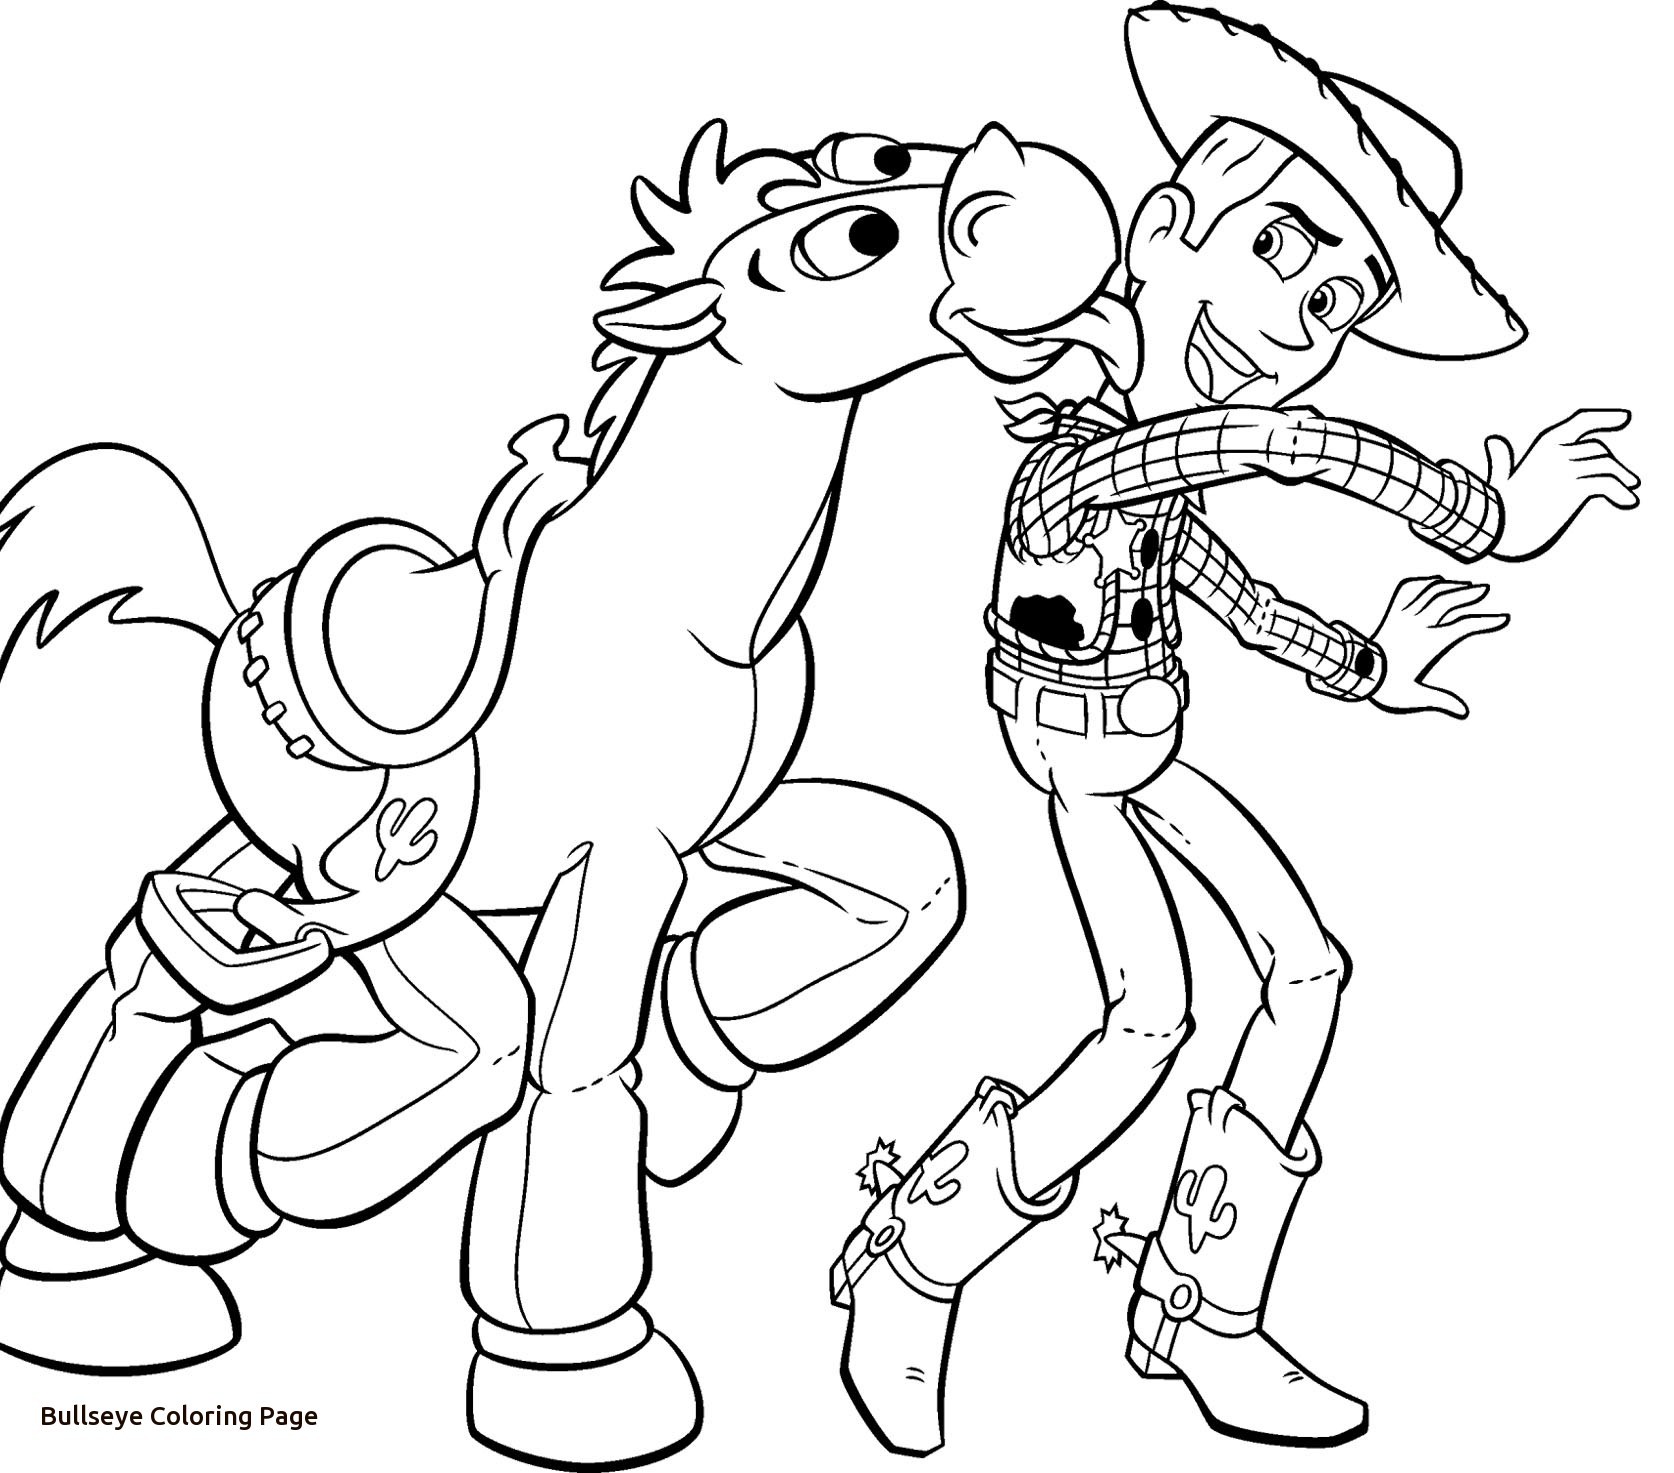 Buzz And Woody Coloring Pages at GetColorings.com | Free printable